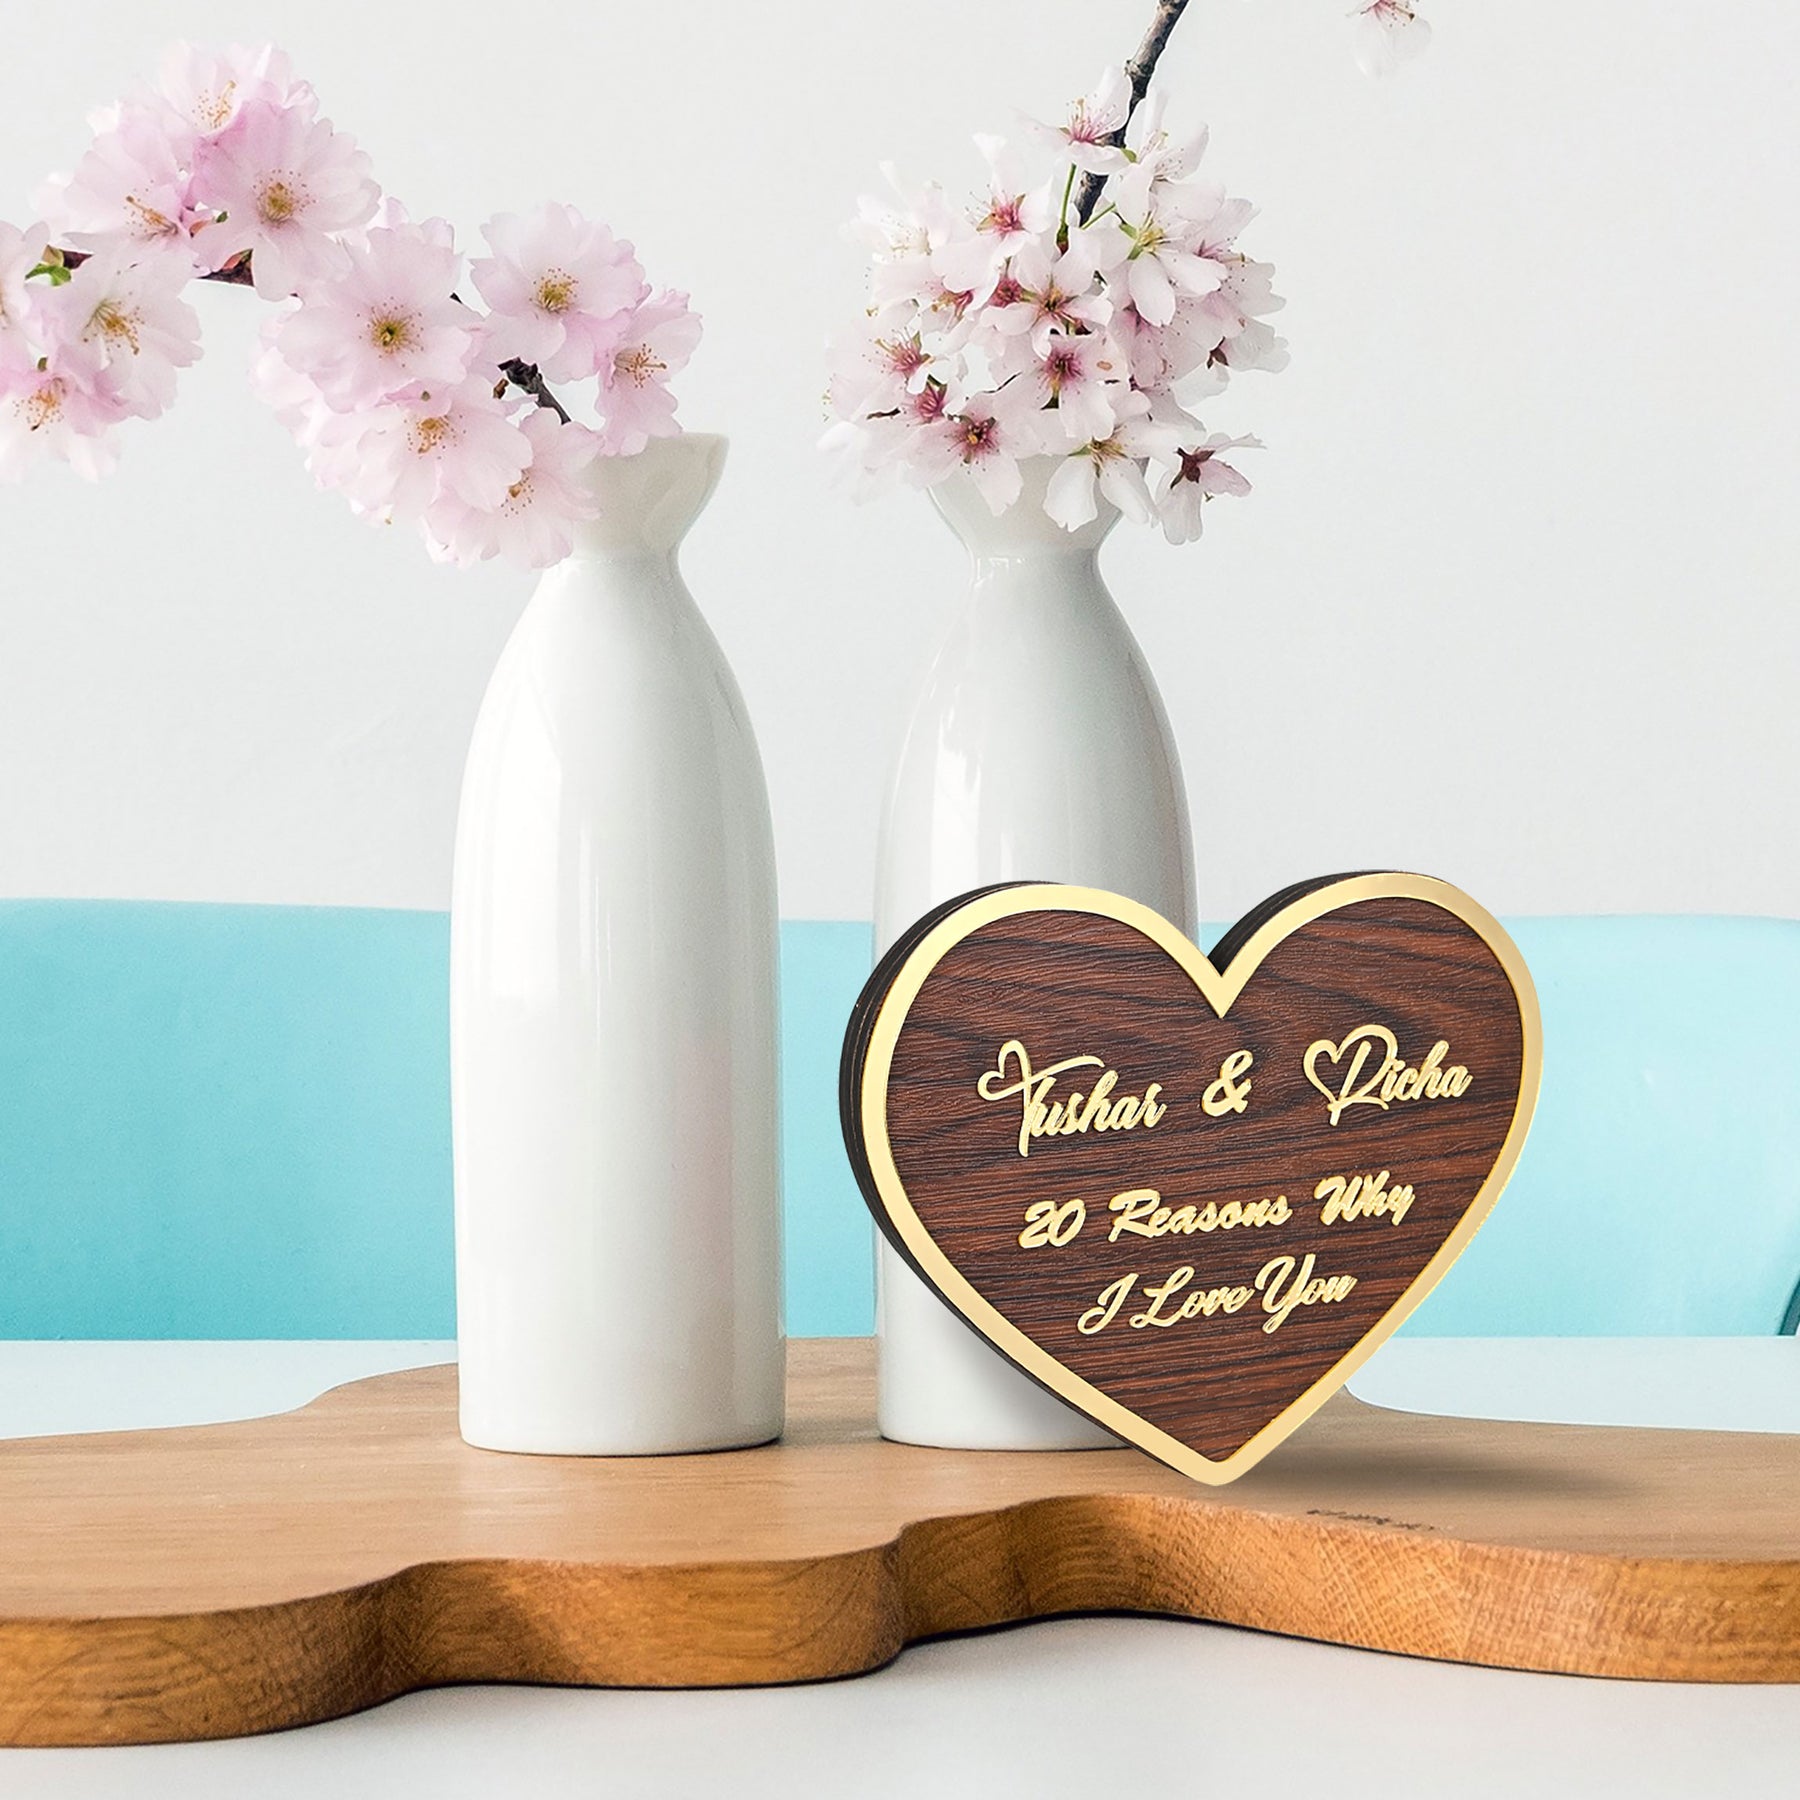 35 Best Handmade Anniversary Gifts To Express Your Affection – Loveable